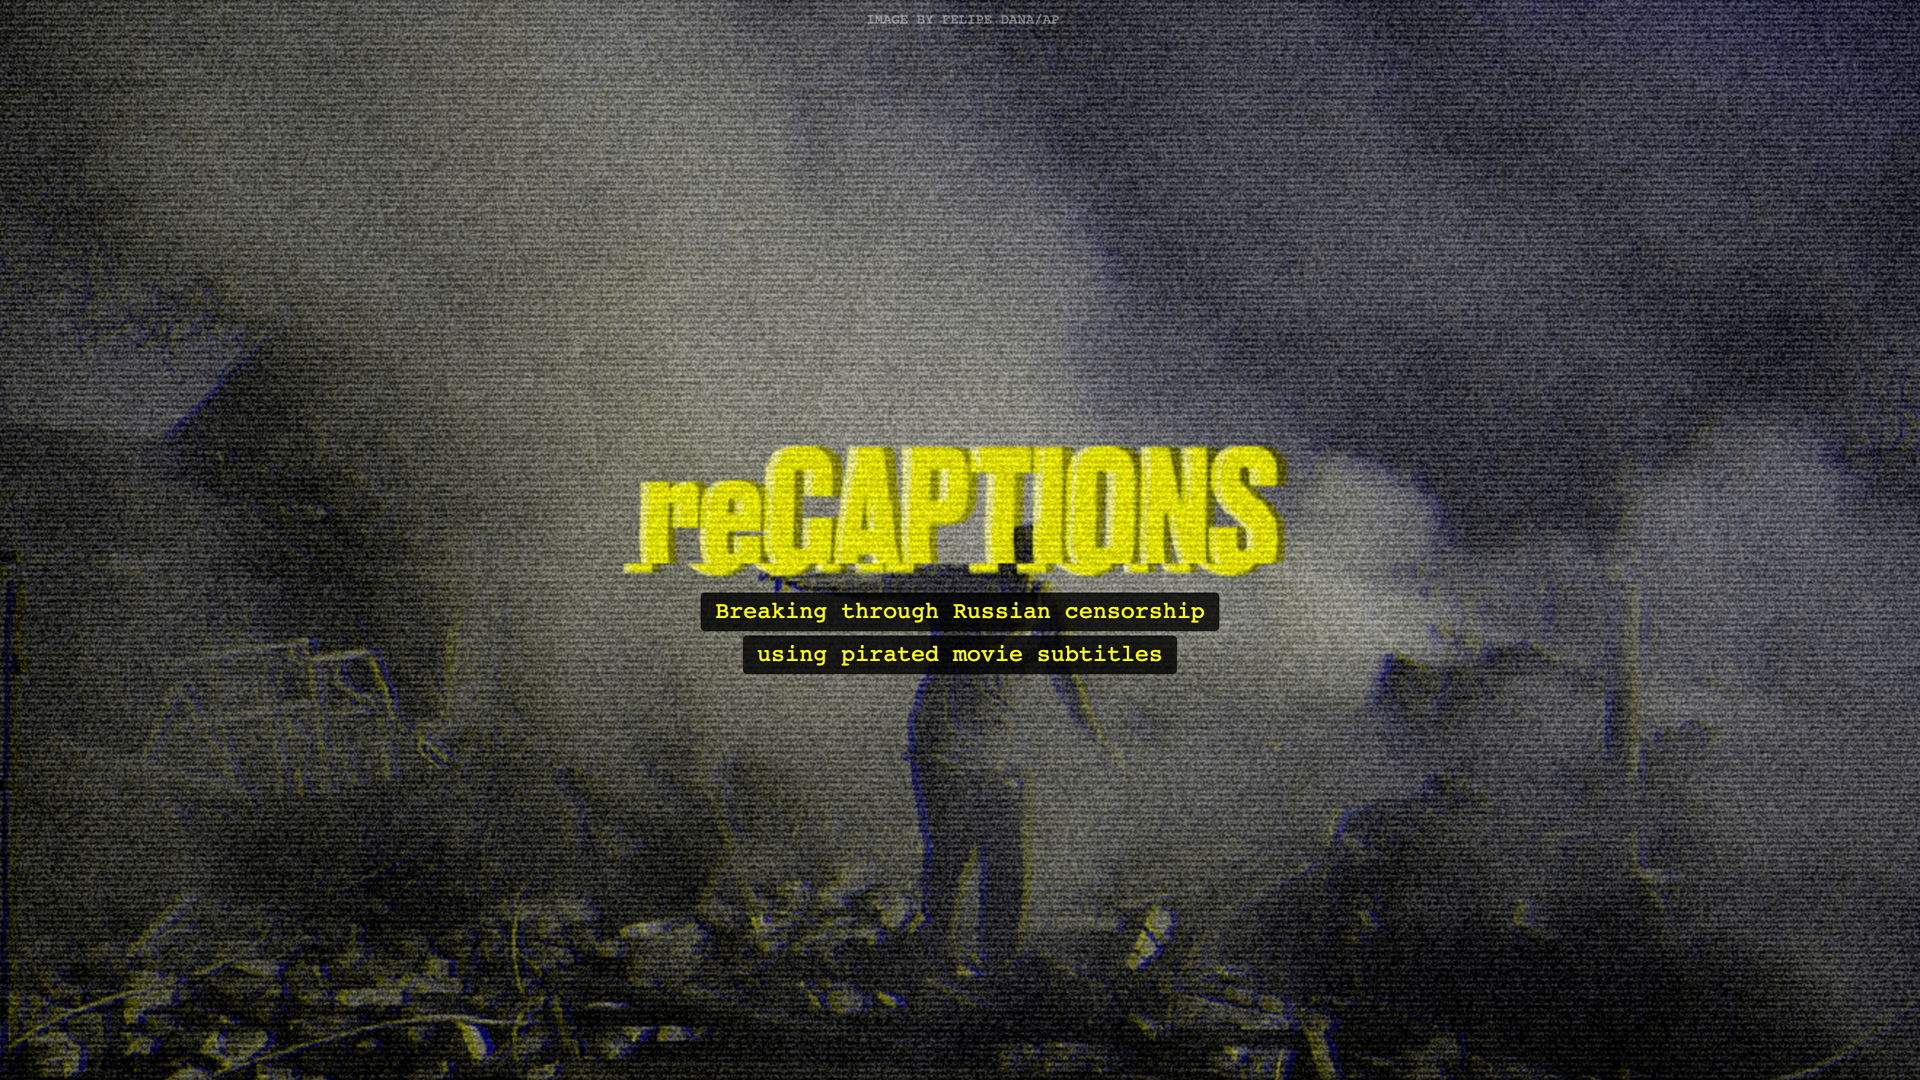 reCaptions uses pirated movie subtitles to deliver news to Russia